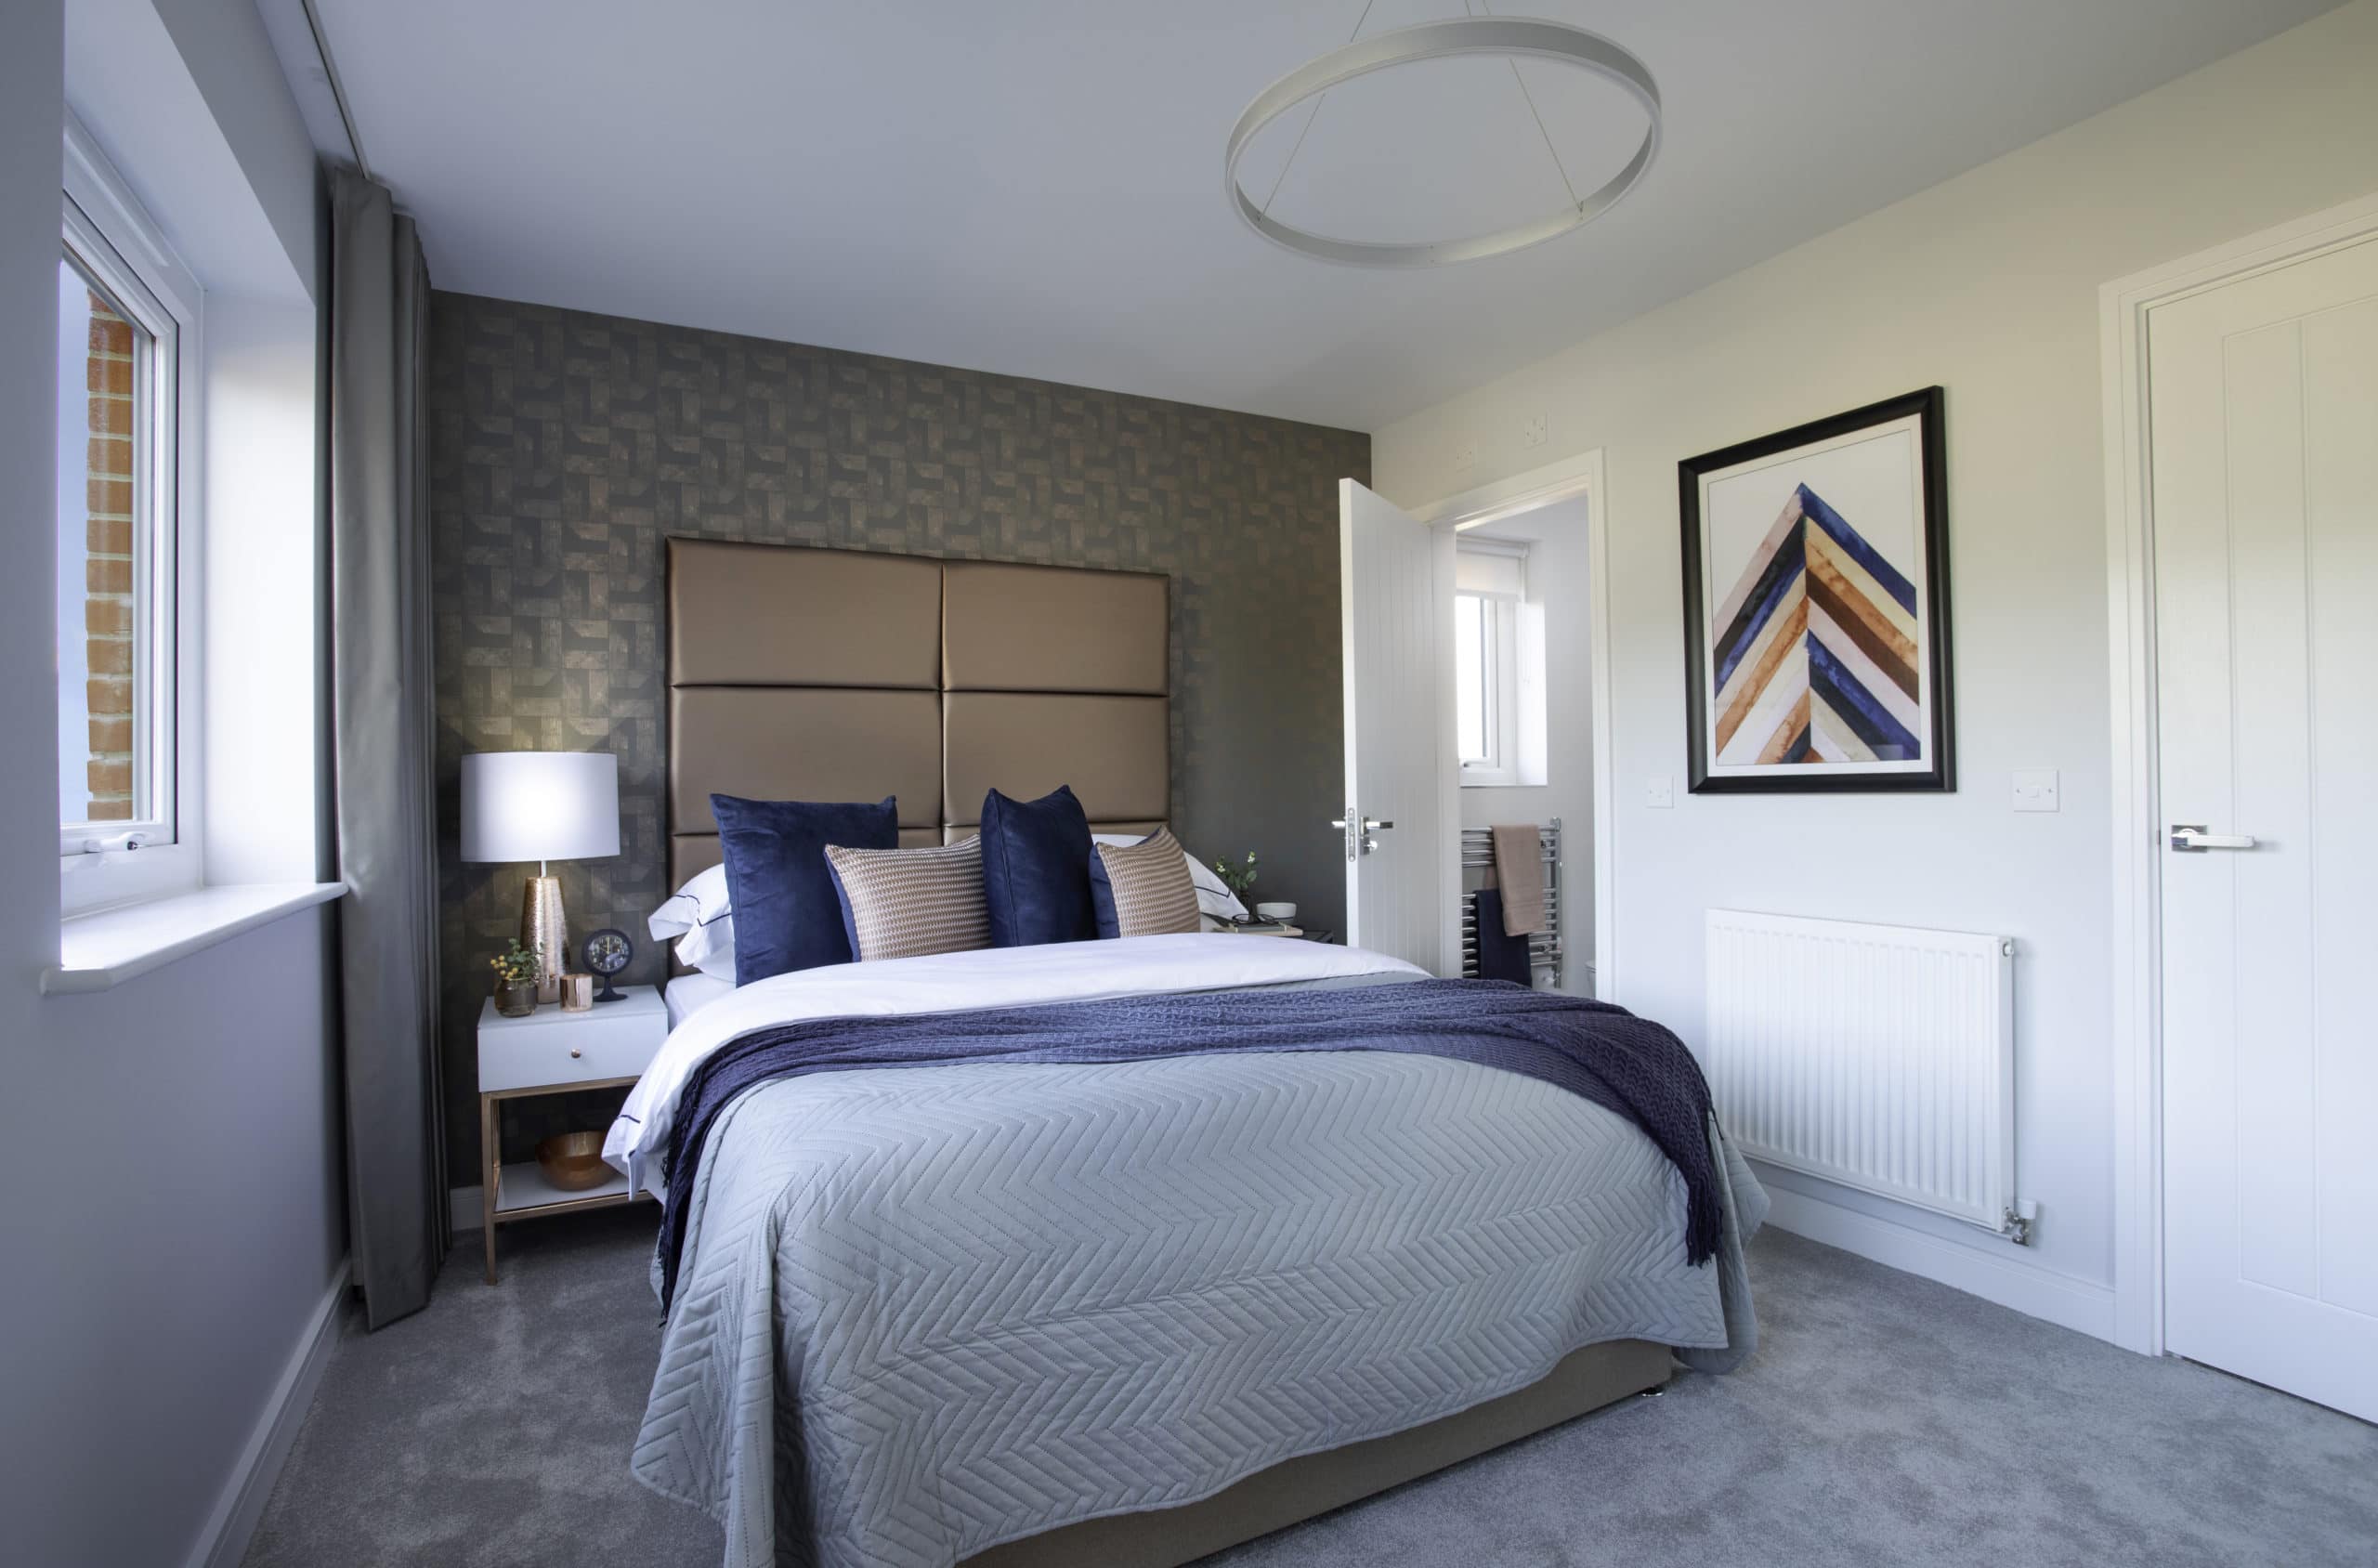 Show home photography from L&Q - Shared Ownership homes available at Share to Buy